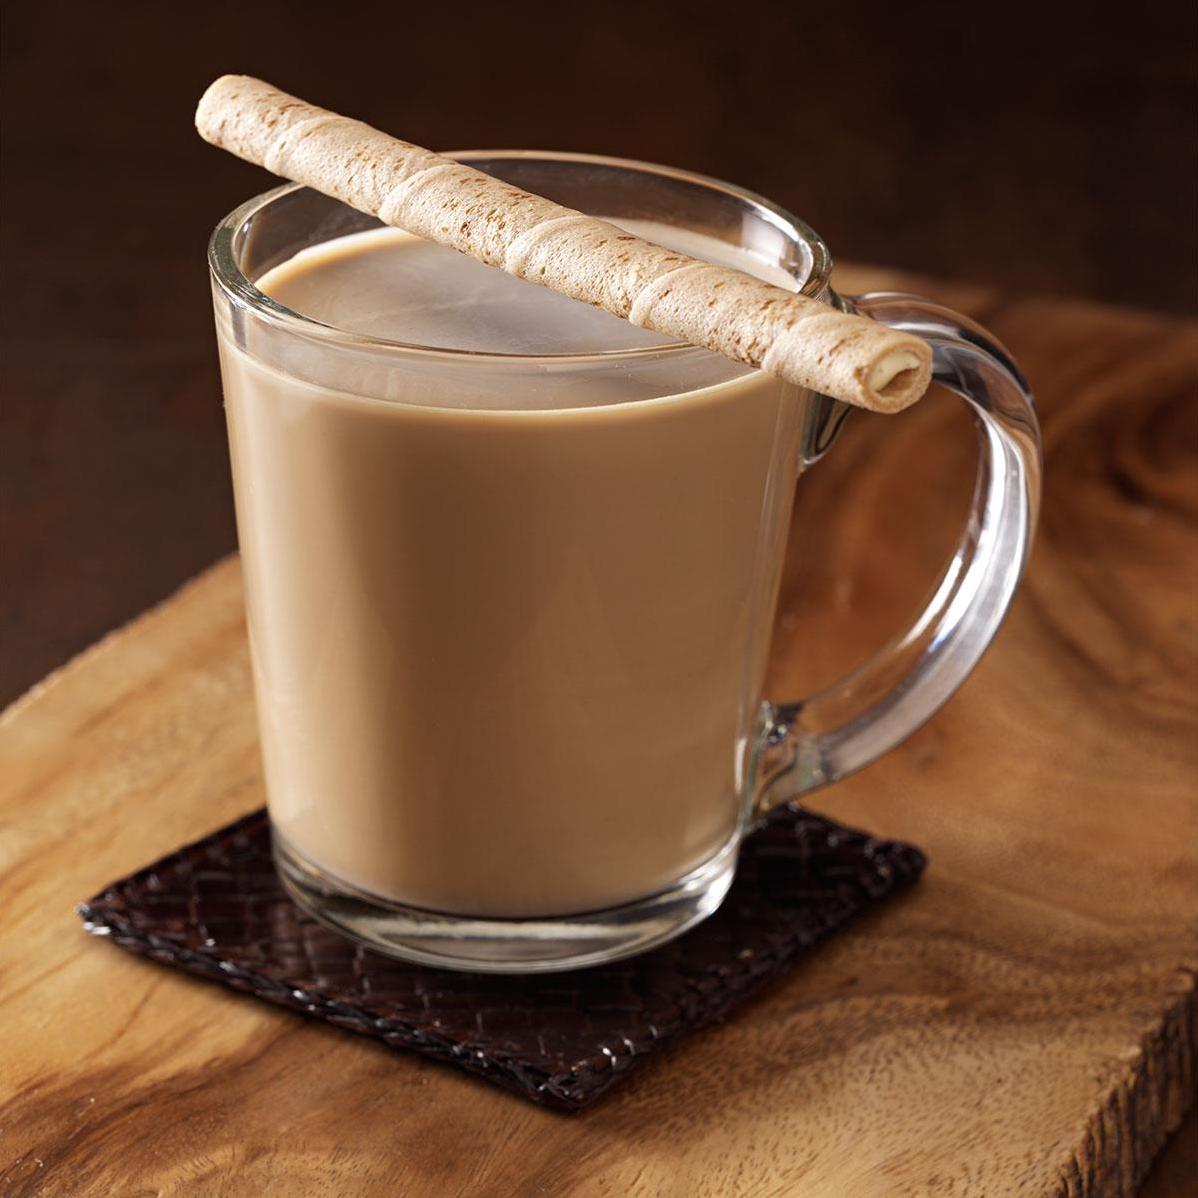  Don't wait for dessert to have a chocolate fix - this coffee has got you covered.